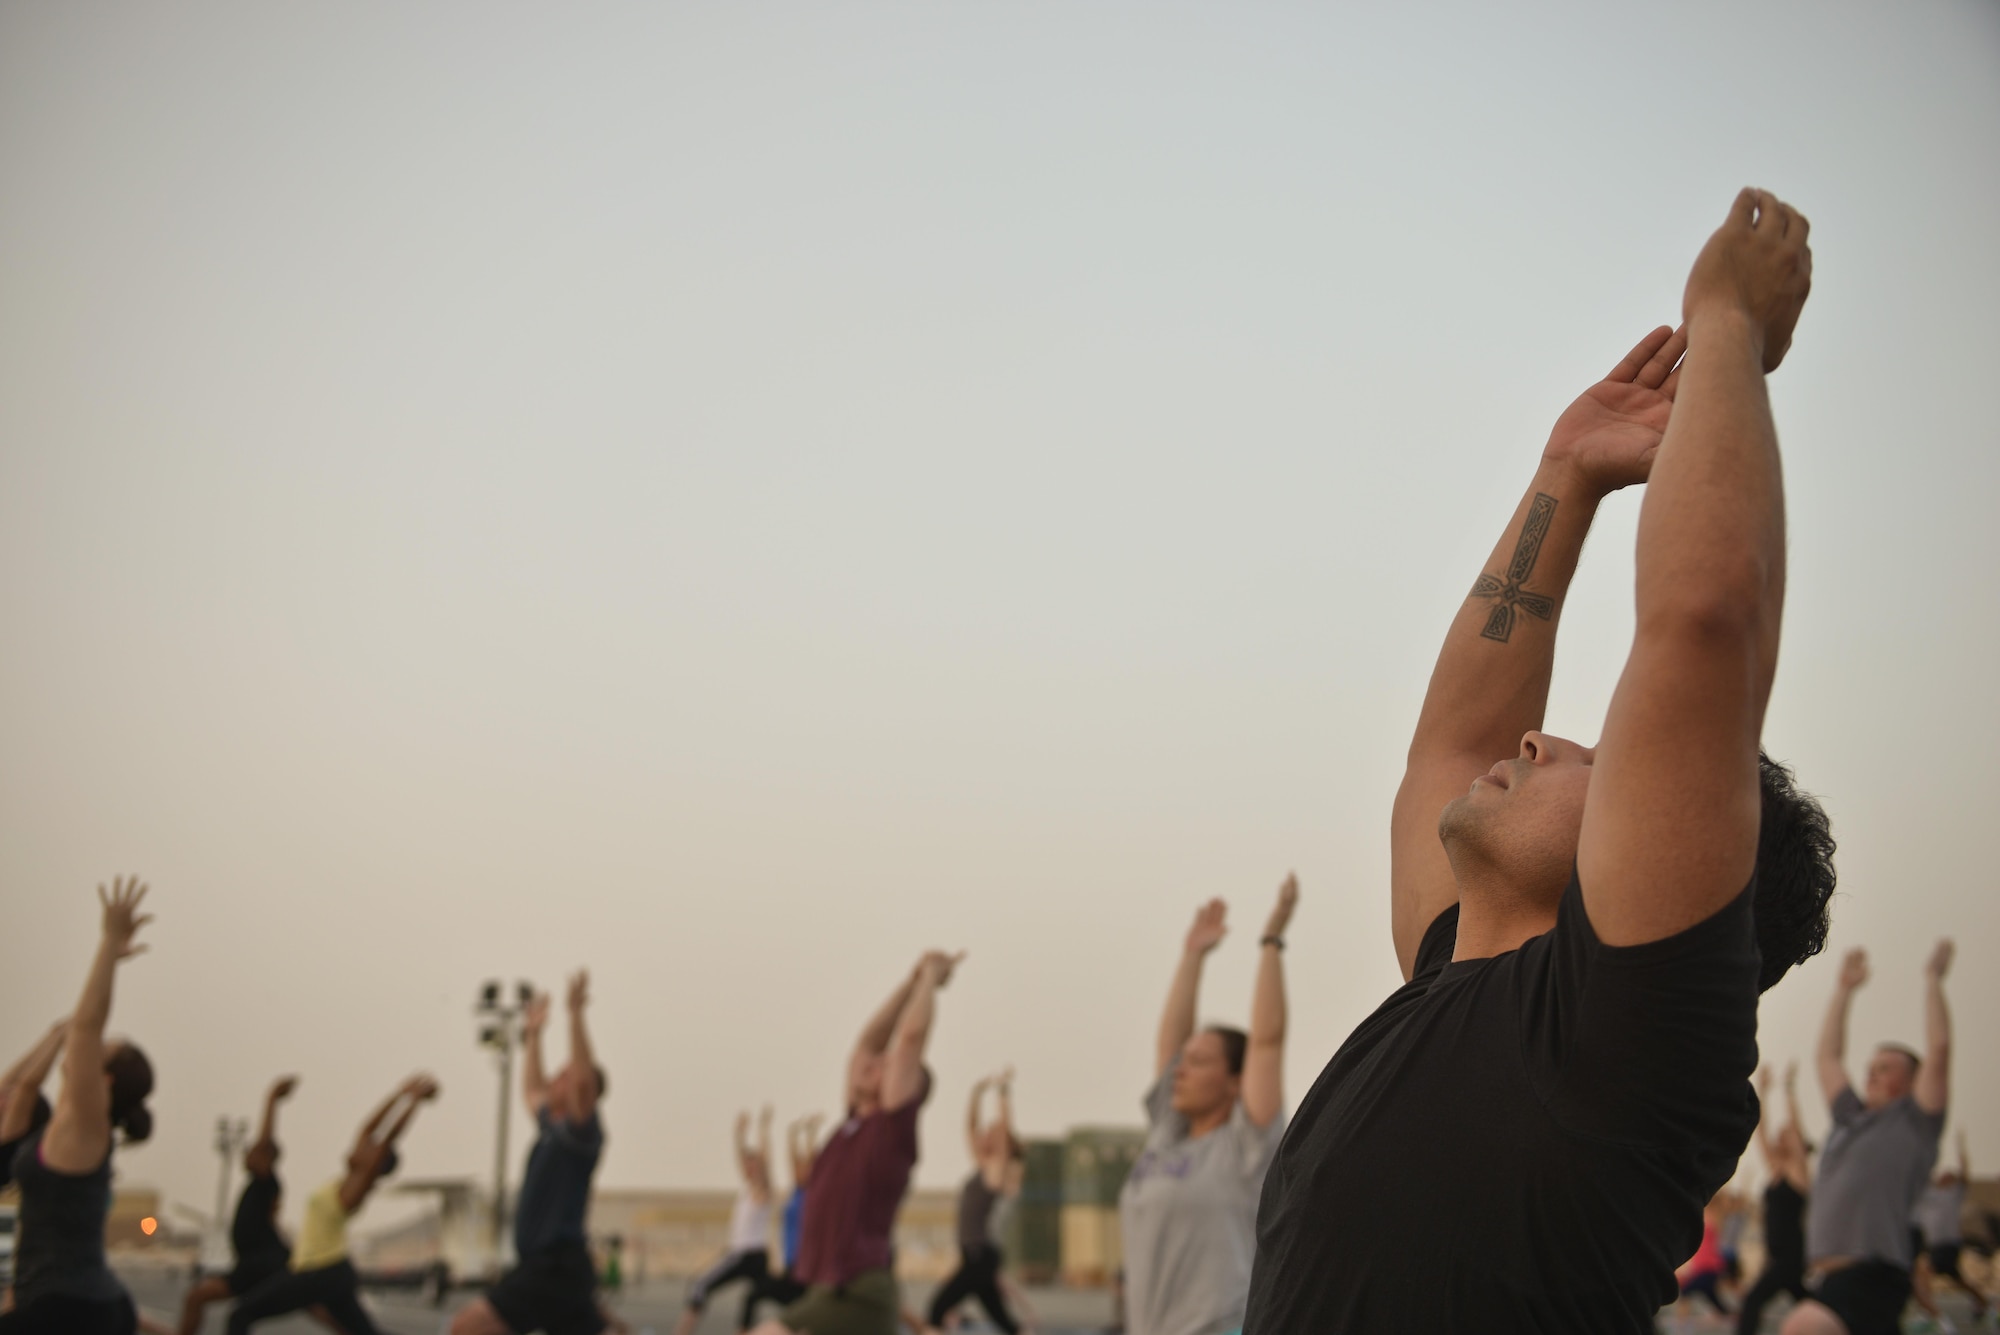 Deployed Soldiers, sailors, airmen, marines, coalition partners and civilians go into the Warrior One pose during the largest Yoga session to take place in Qatar history July 11, 2015 Al Udeid Air Base, Qatar. This event opened its doors to all levels of practitioners from novice to expert. It allowed the fine men and women assigned to Al Udeid Air Base to relax and enjoy a different kind of exercise in a neutral environment. (U.S. Air Force photo/Staff Sgt. Alexandre Montes)